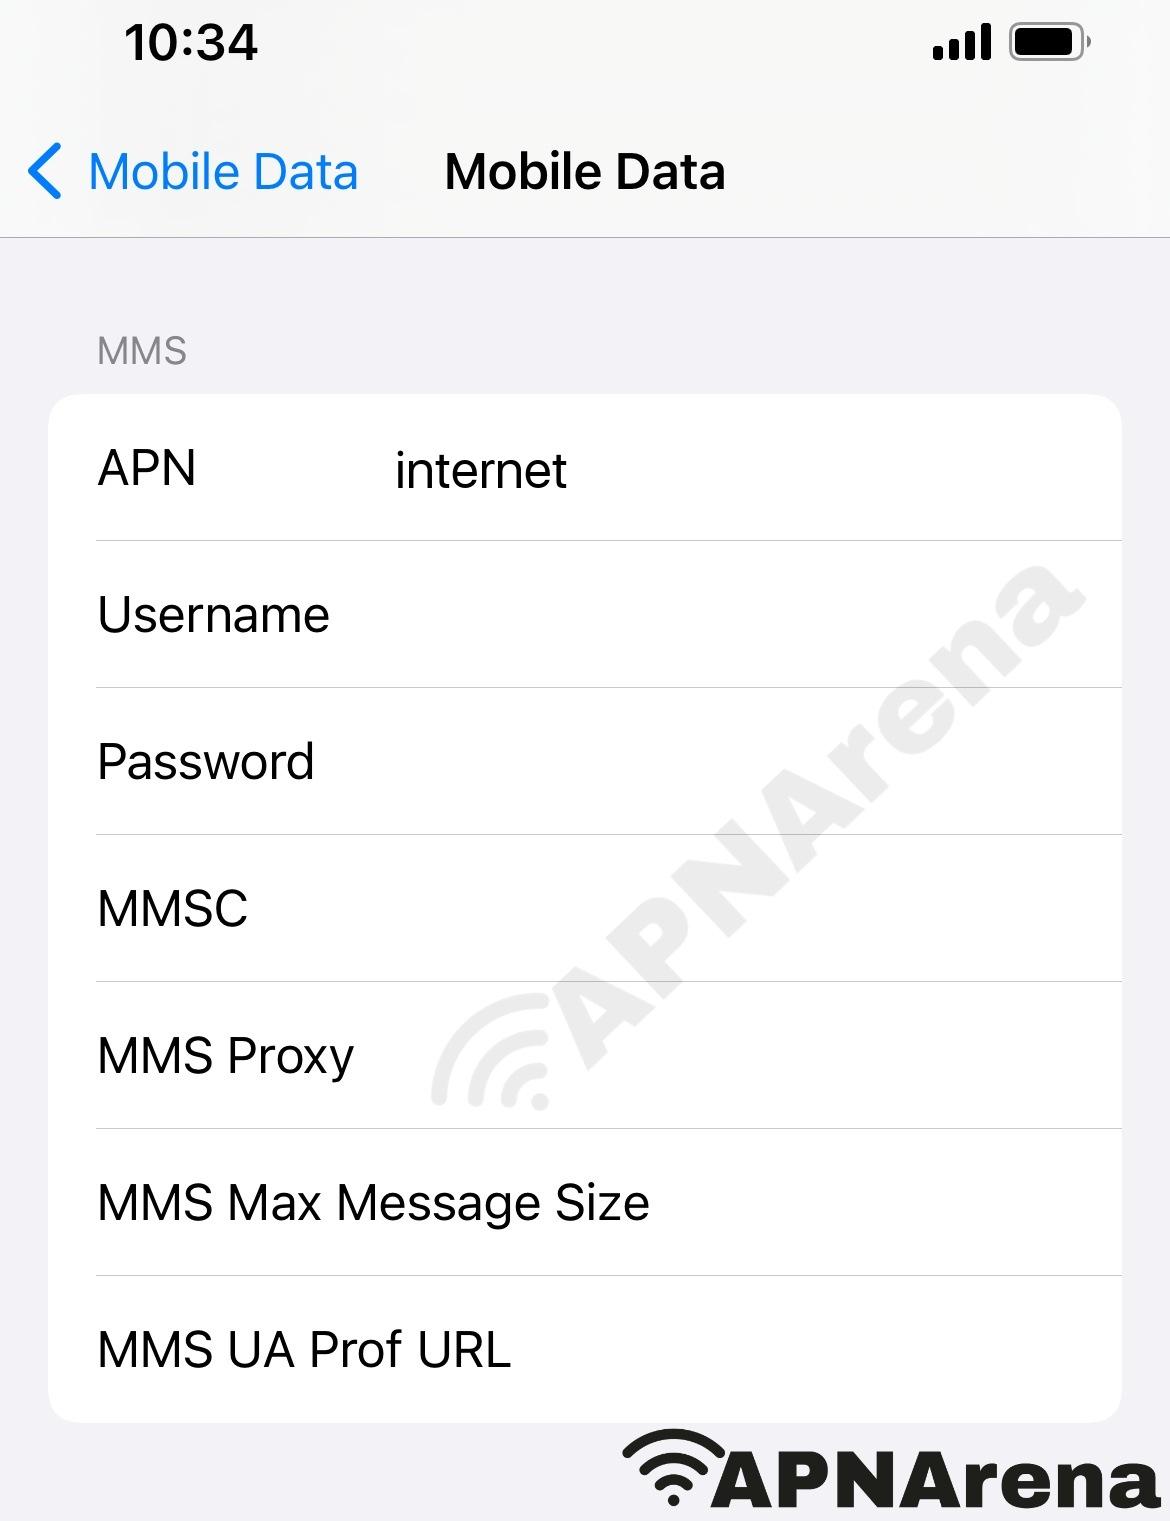 A1 Serbia (Vip mobile) MMS Settings for iPhone